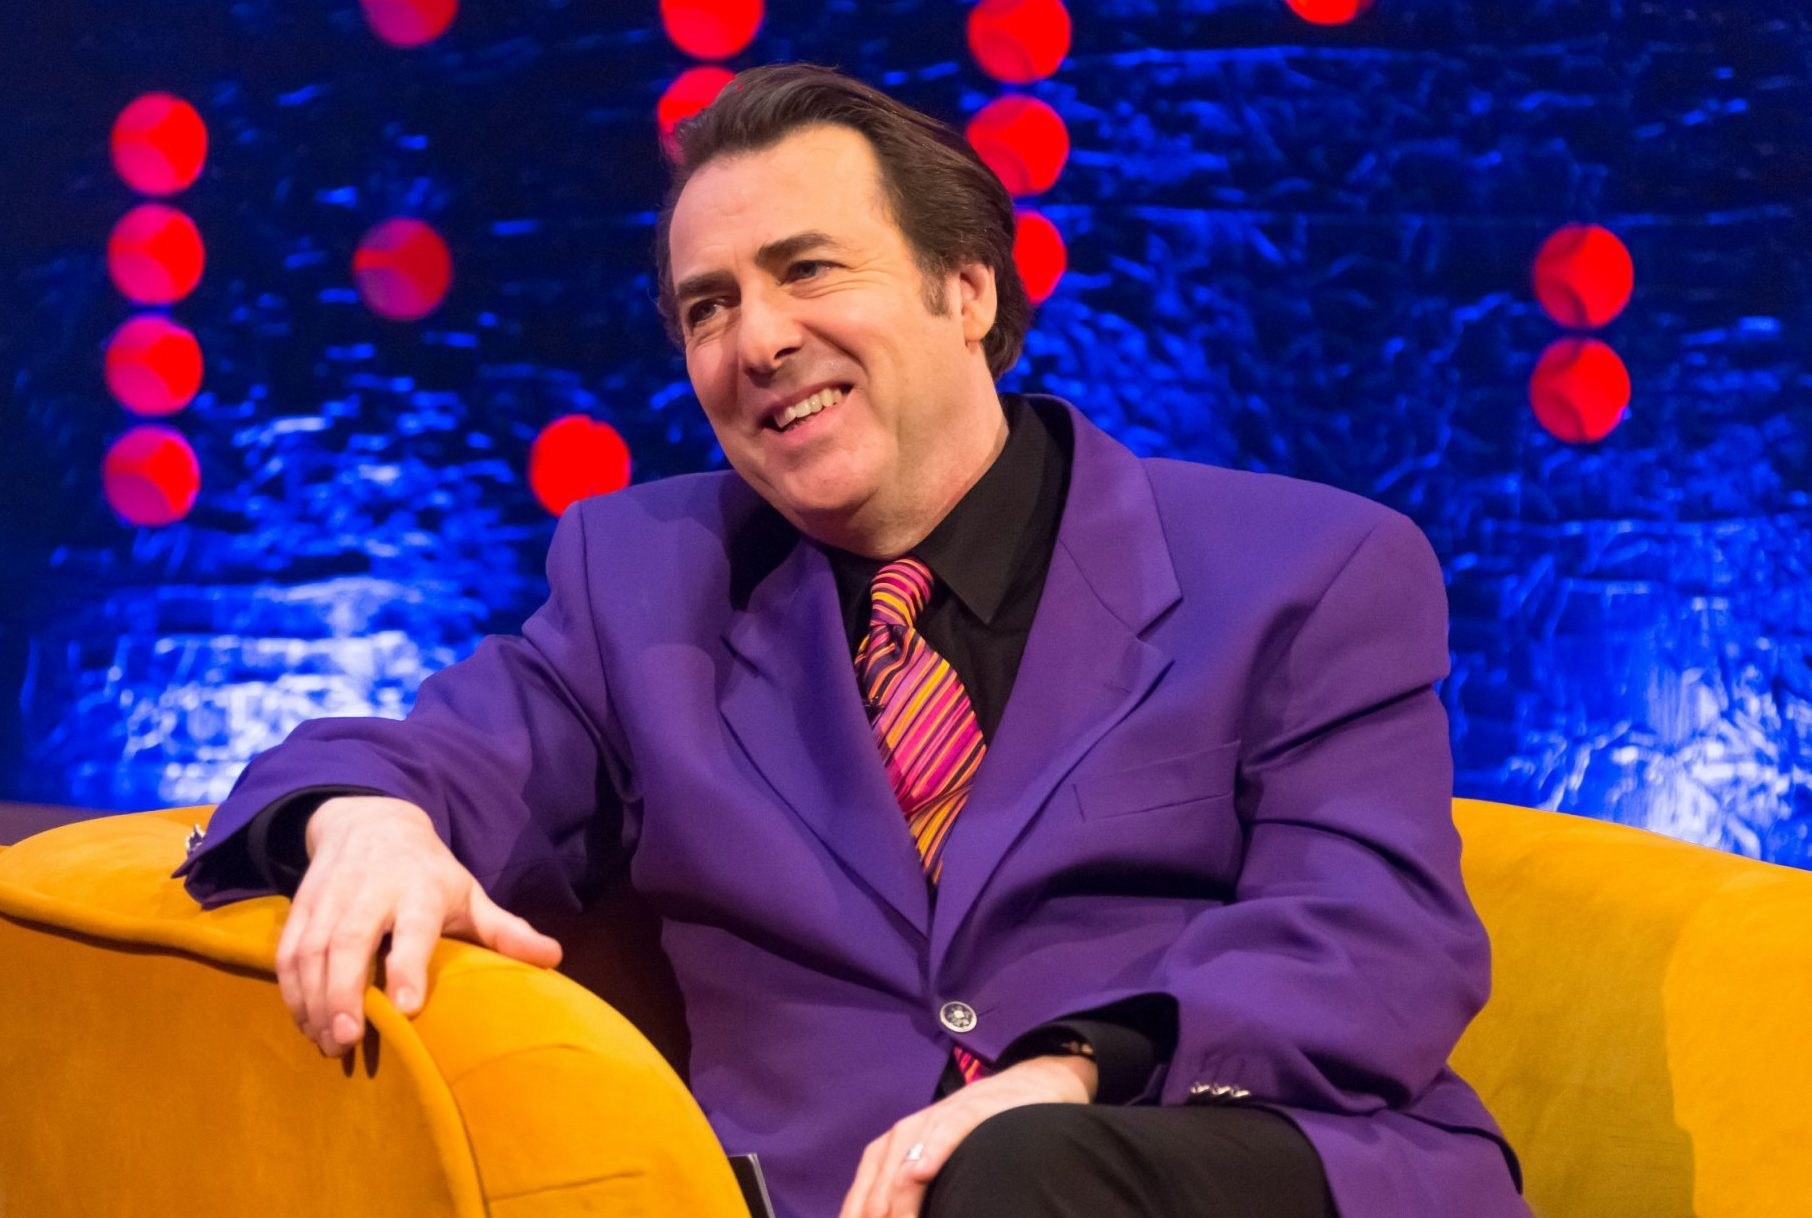 Jonathan Ross’s first sexual experiences were with ‘an orange and a Hoover’